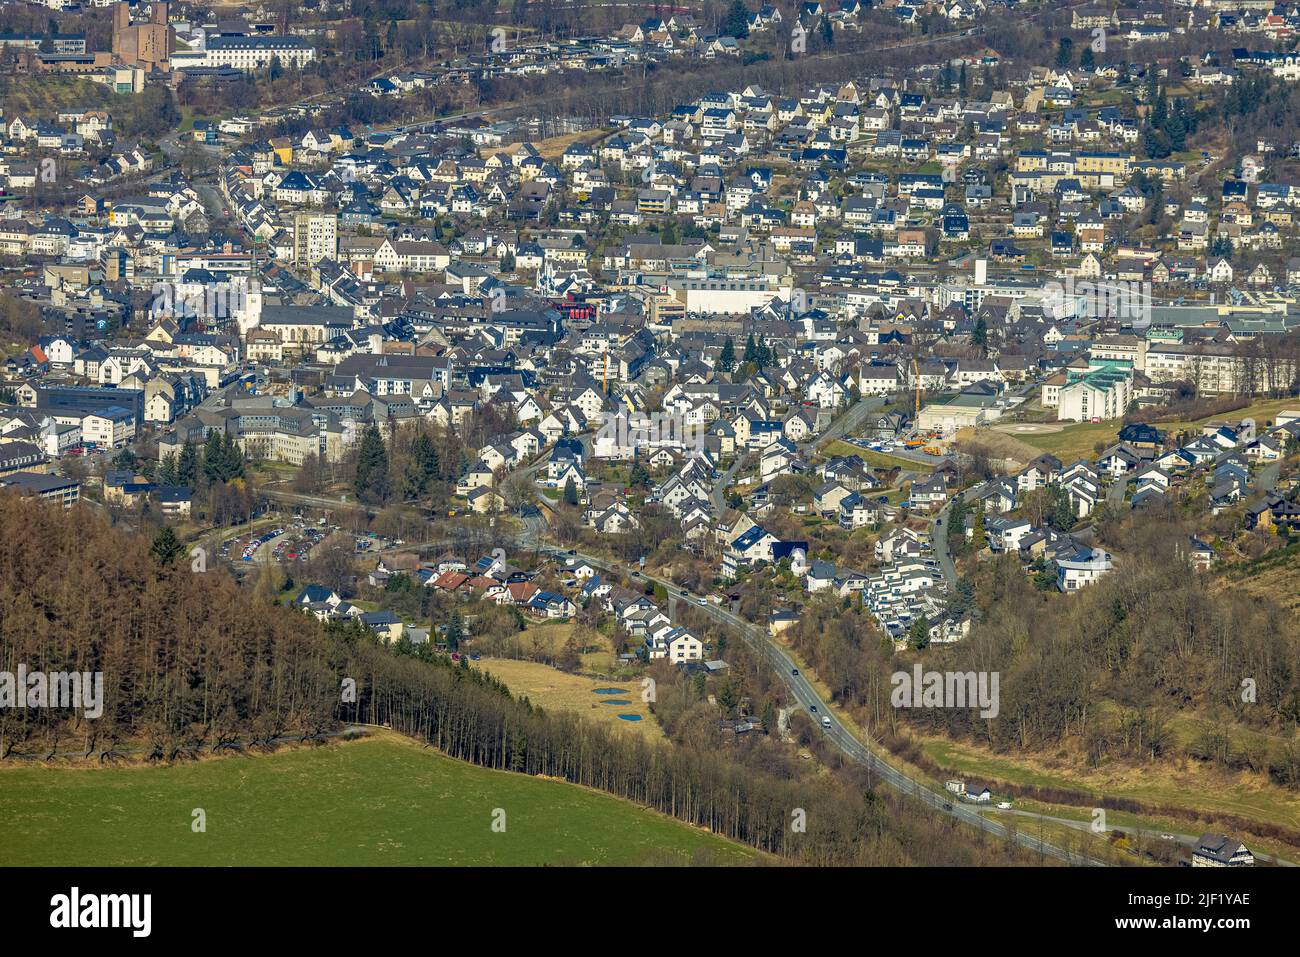 Aerial view, city view, city centre, Meschede, Sauerland, North Rhine-Westphalia, Germany, City, DE, Europe, downtown, aerial photography, aerial view Stock Photo